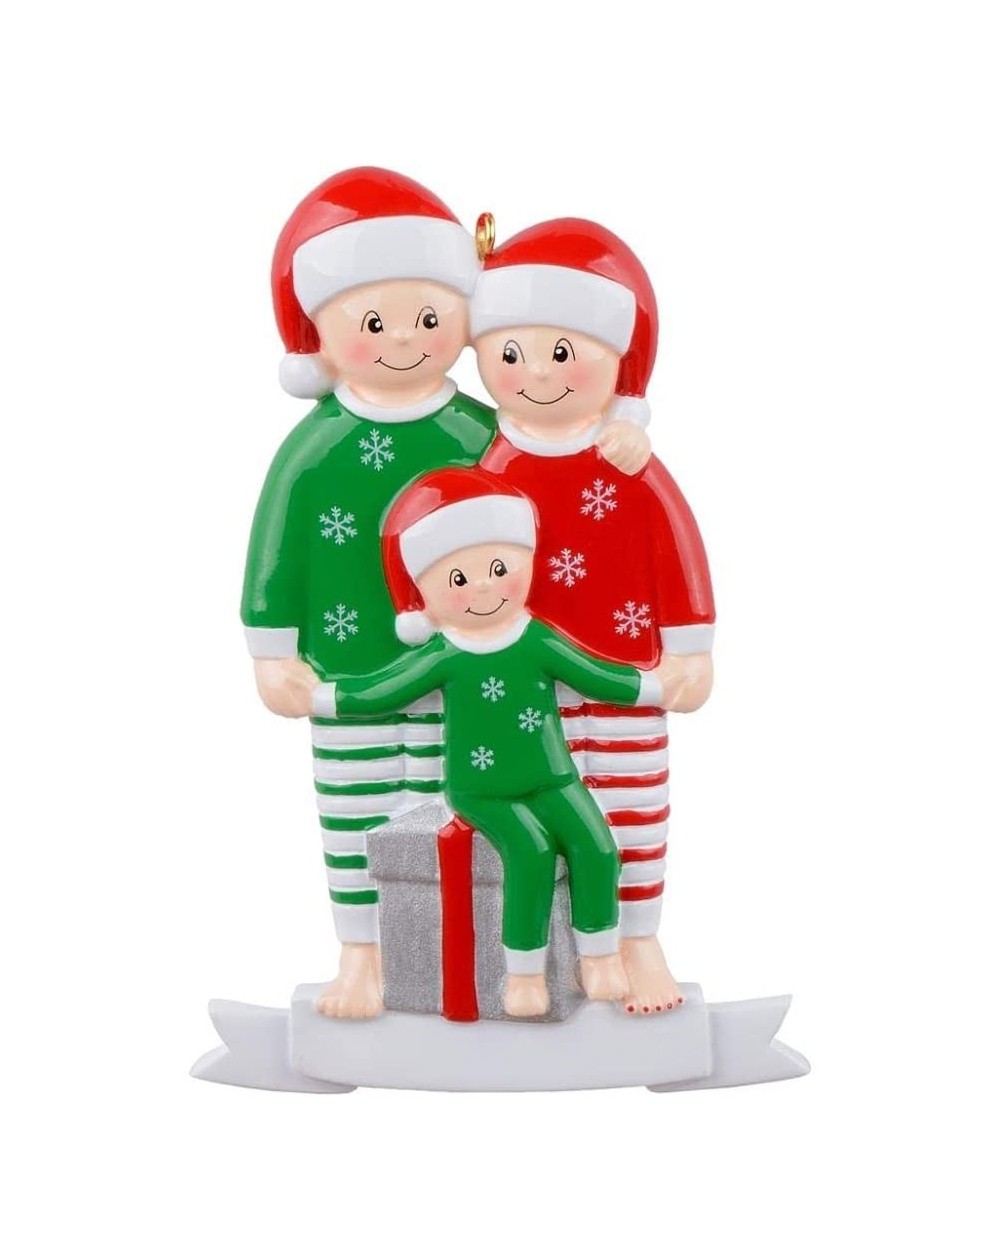 Ornaments Pajama Family of 3 Ornament Personalized Christmas Tree Decoration - CE18I9YM3II $13.13